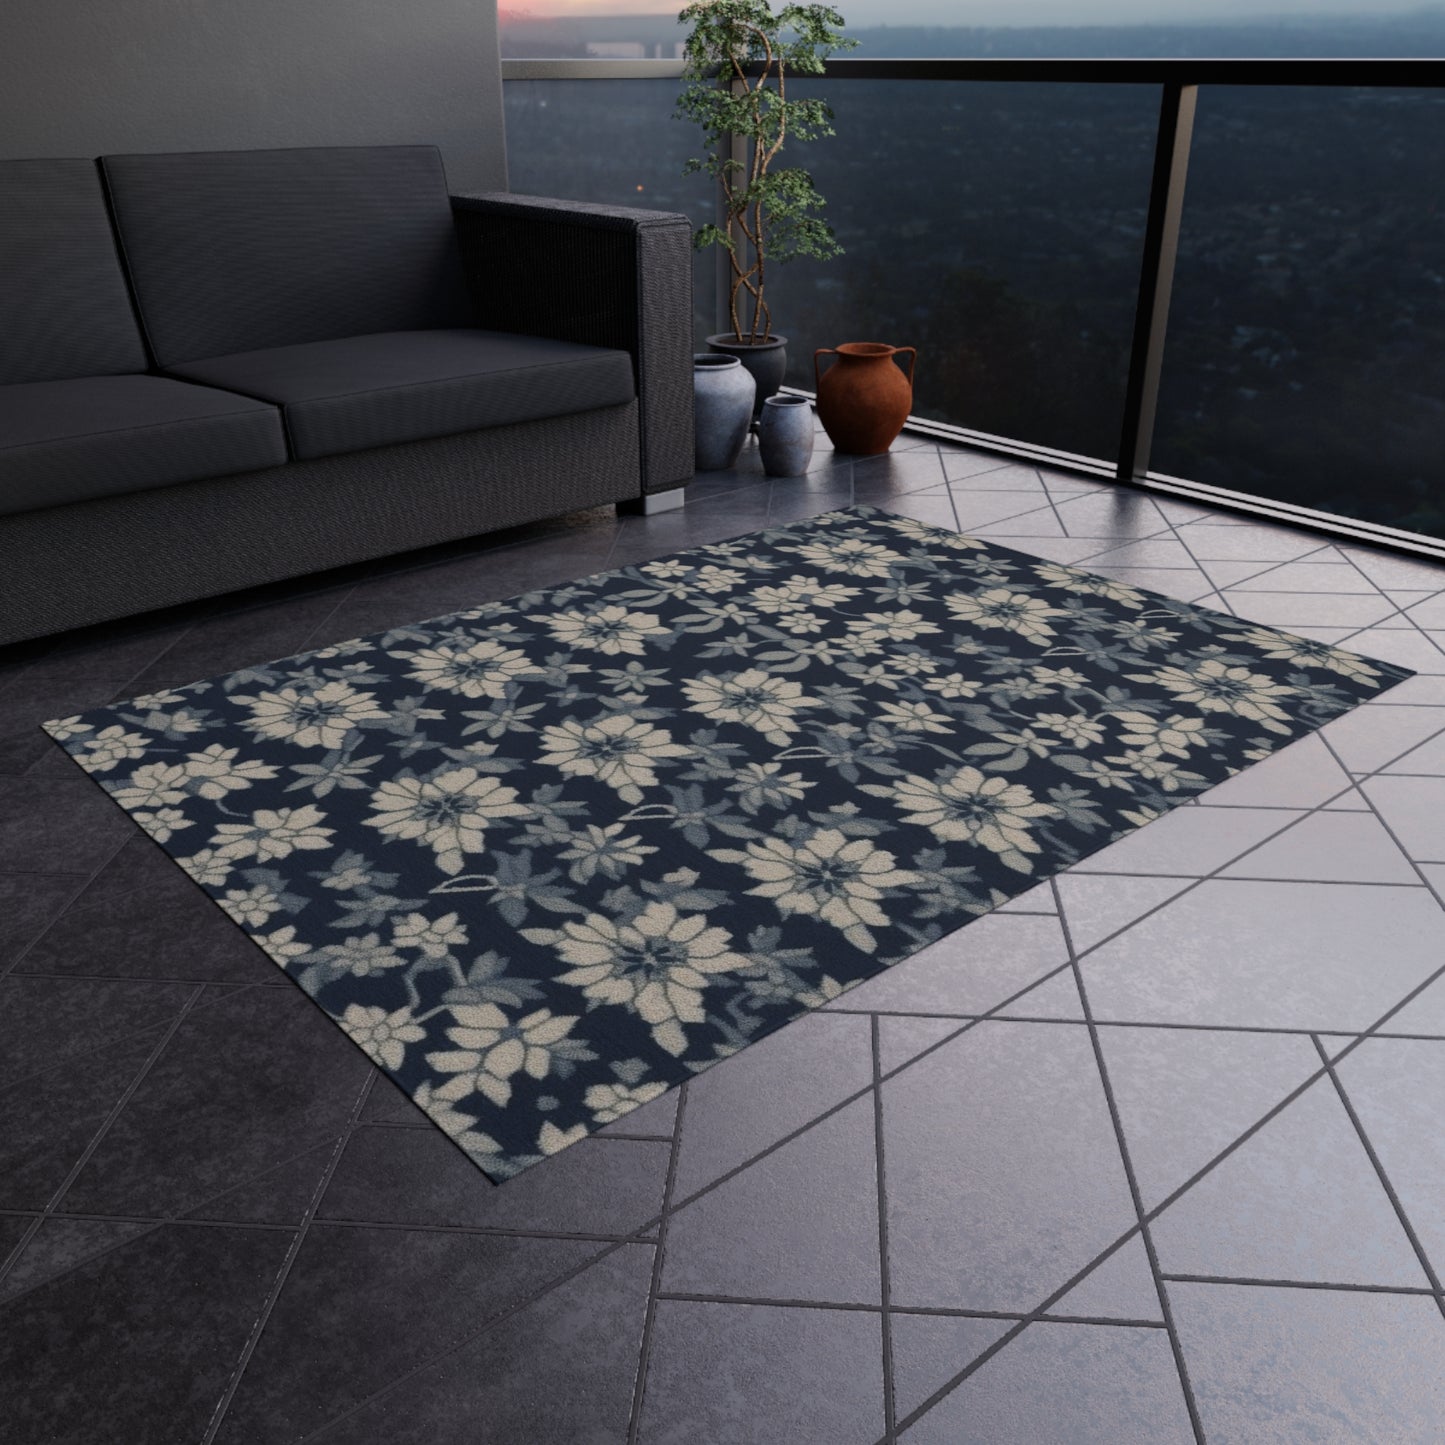 Cassidy-Inspired Floral Indoor/Outdoor Rug - Large, Washable Area Rugs or Door Mat